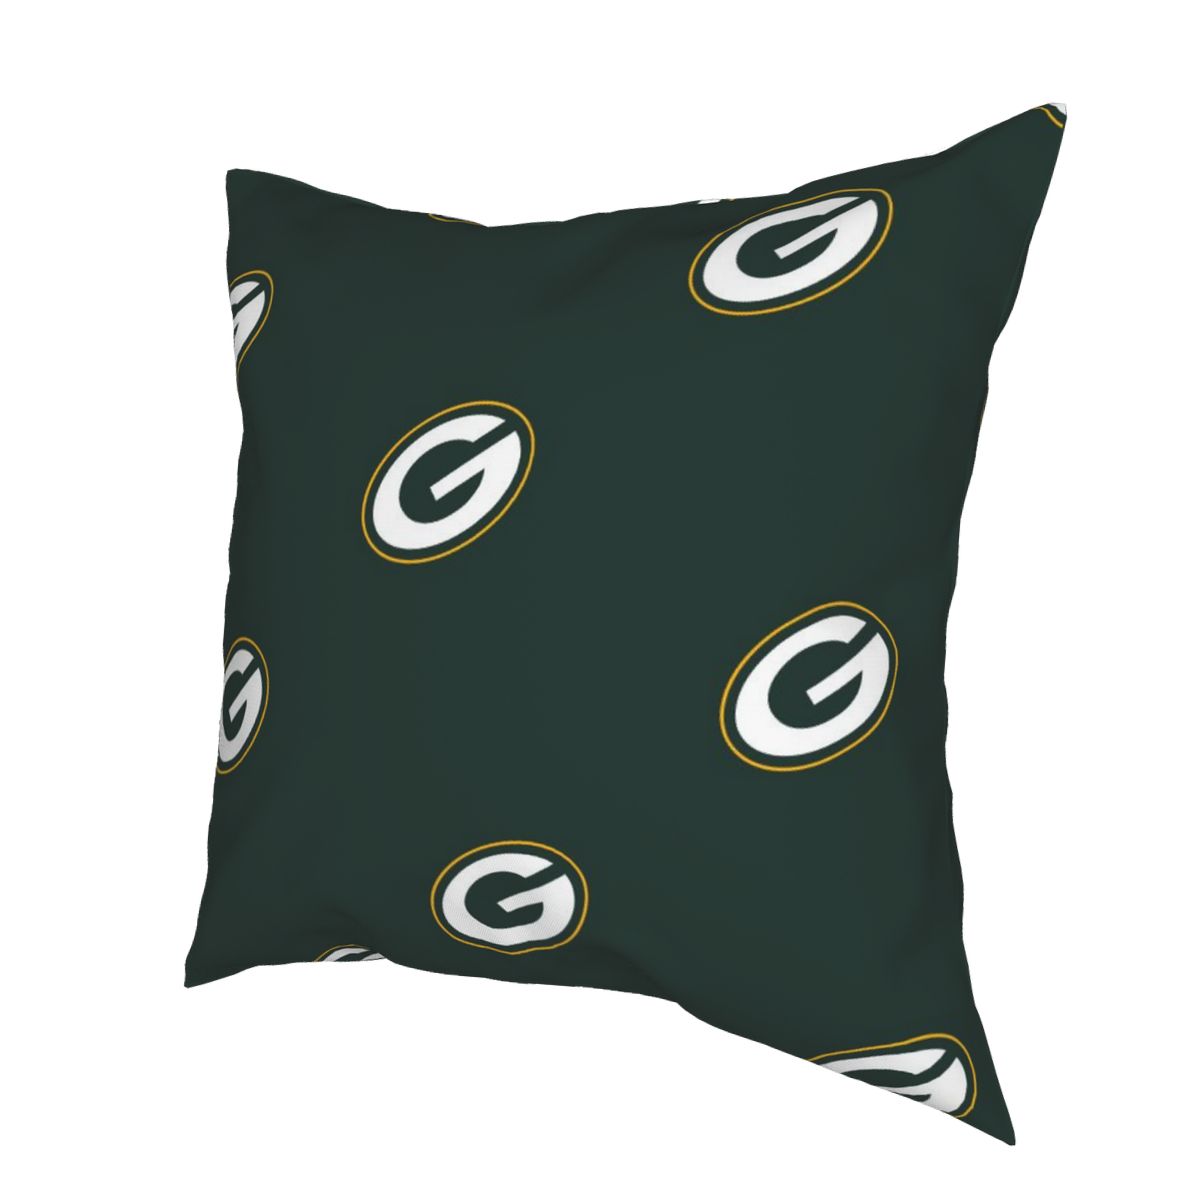 Custom Decorative Football Pillow Case Green Bay Packers Pillowcase Personalized Throw Pillow Covers